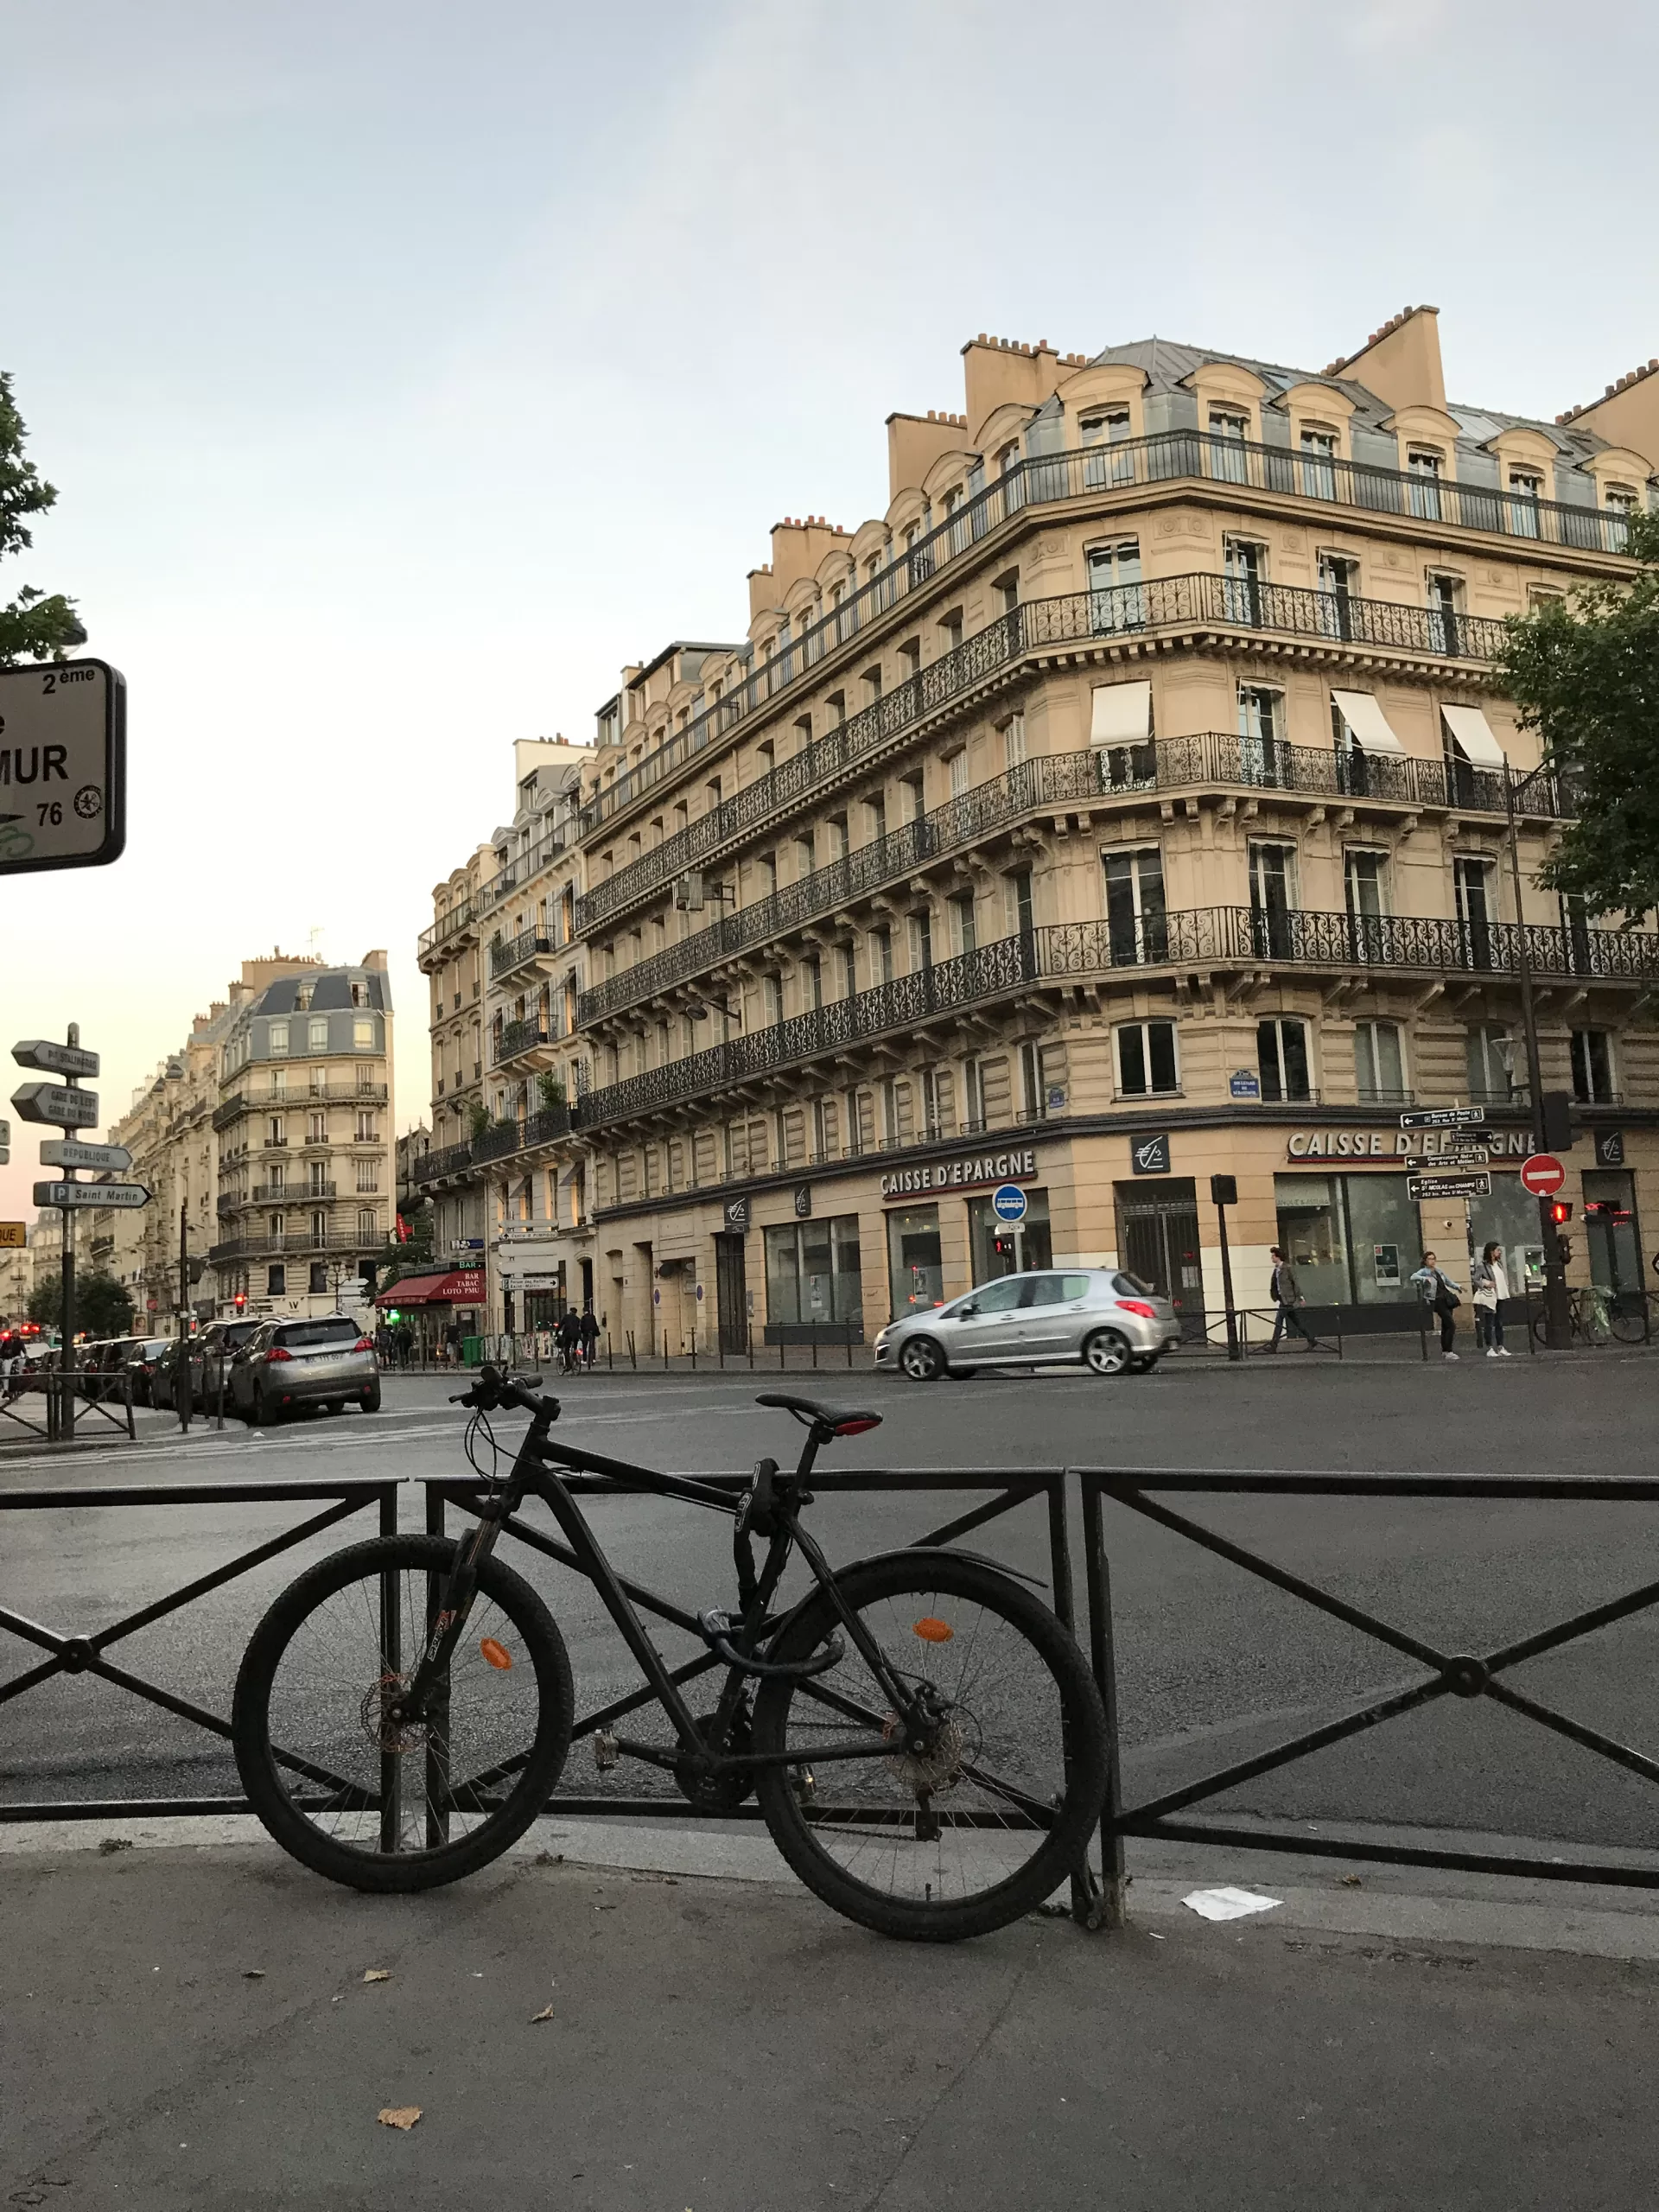 An intersection in Paris, France. There's a black railing along the edge of the sidewalk with a black bike chained to it.